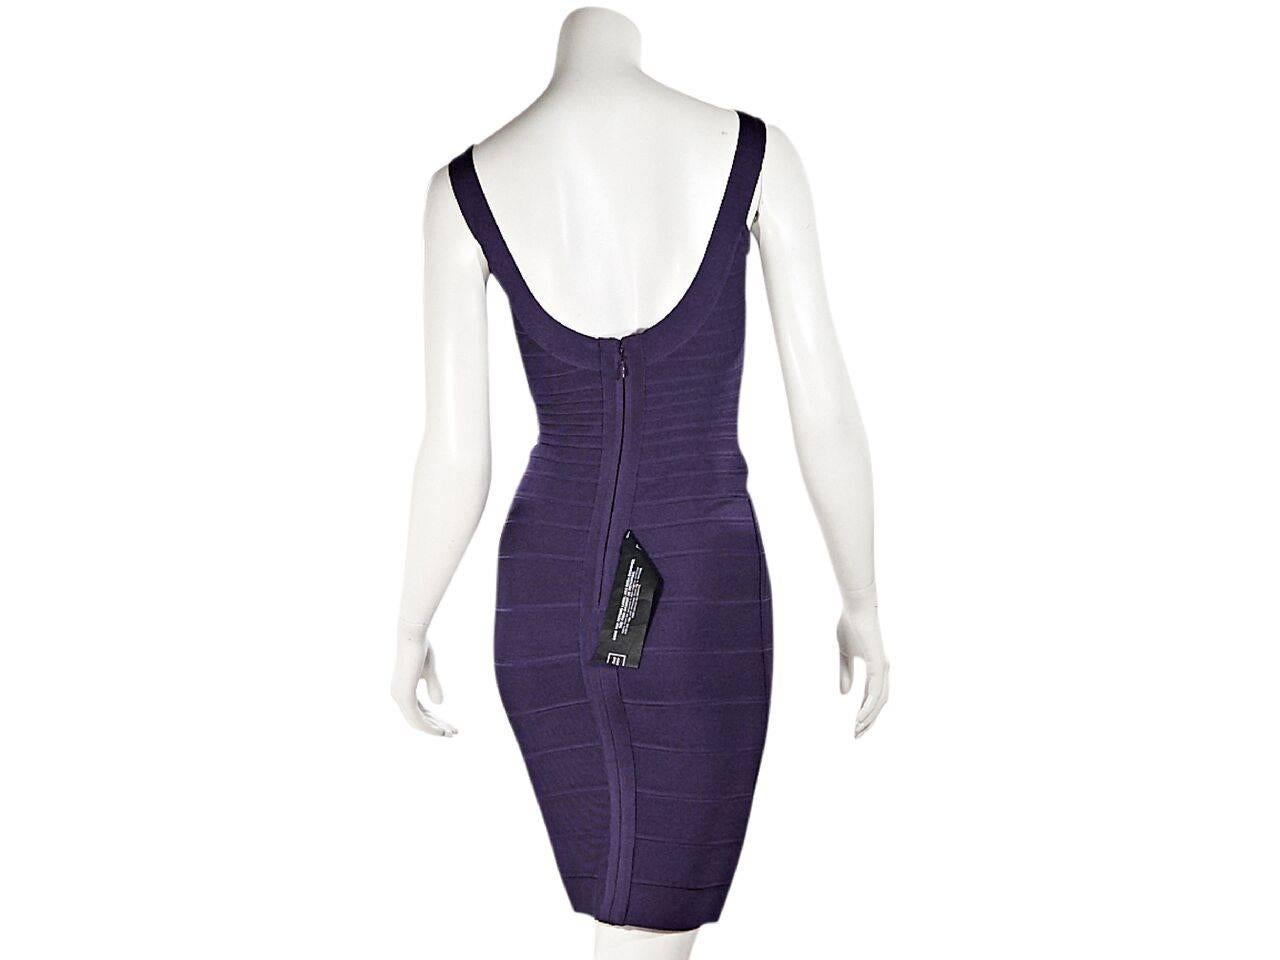 Product details:  Purple bandage mini dress by Herve Leger.  Deep scoopneck and back.  Concealed back zip closure.  
Condition: Pre-owned. New with tags.
Est. Retail $895.00